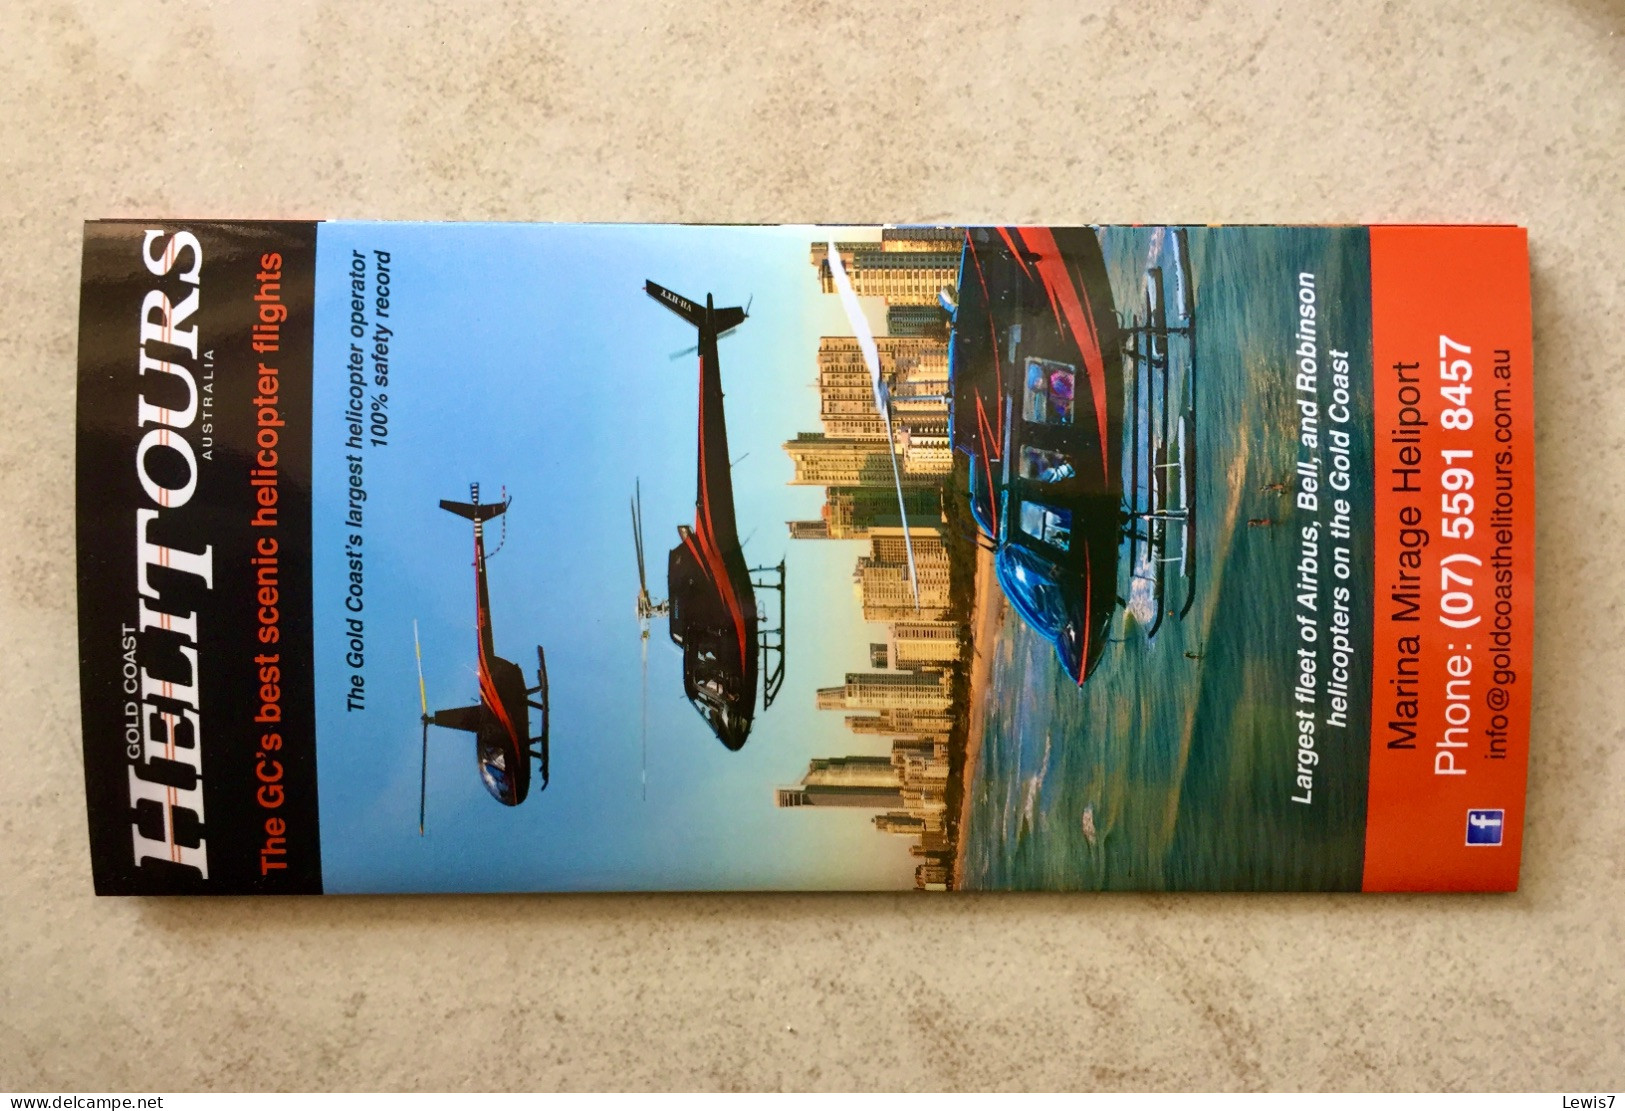 Brochure Helicopter - Gold Coast - Australia - Helicopters